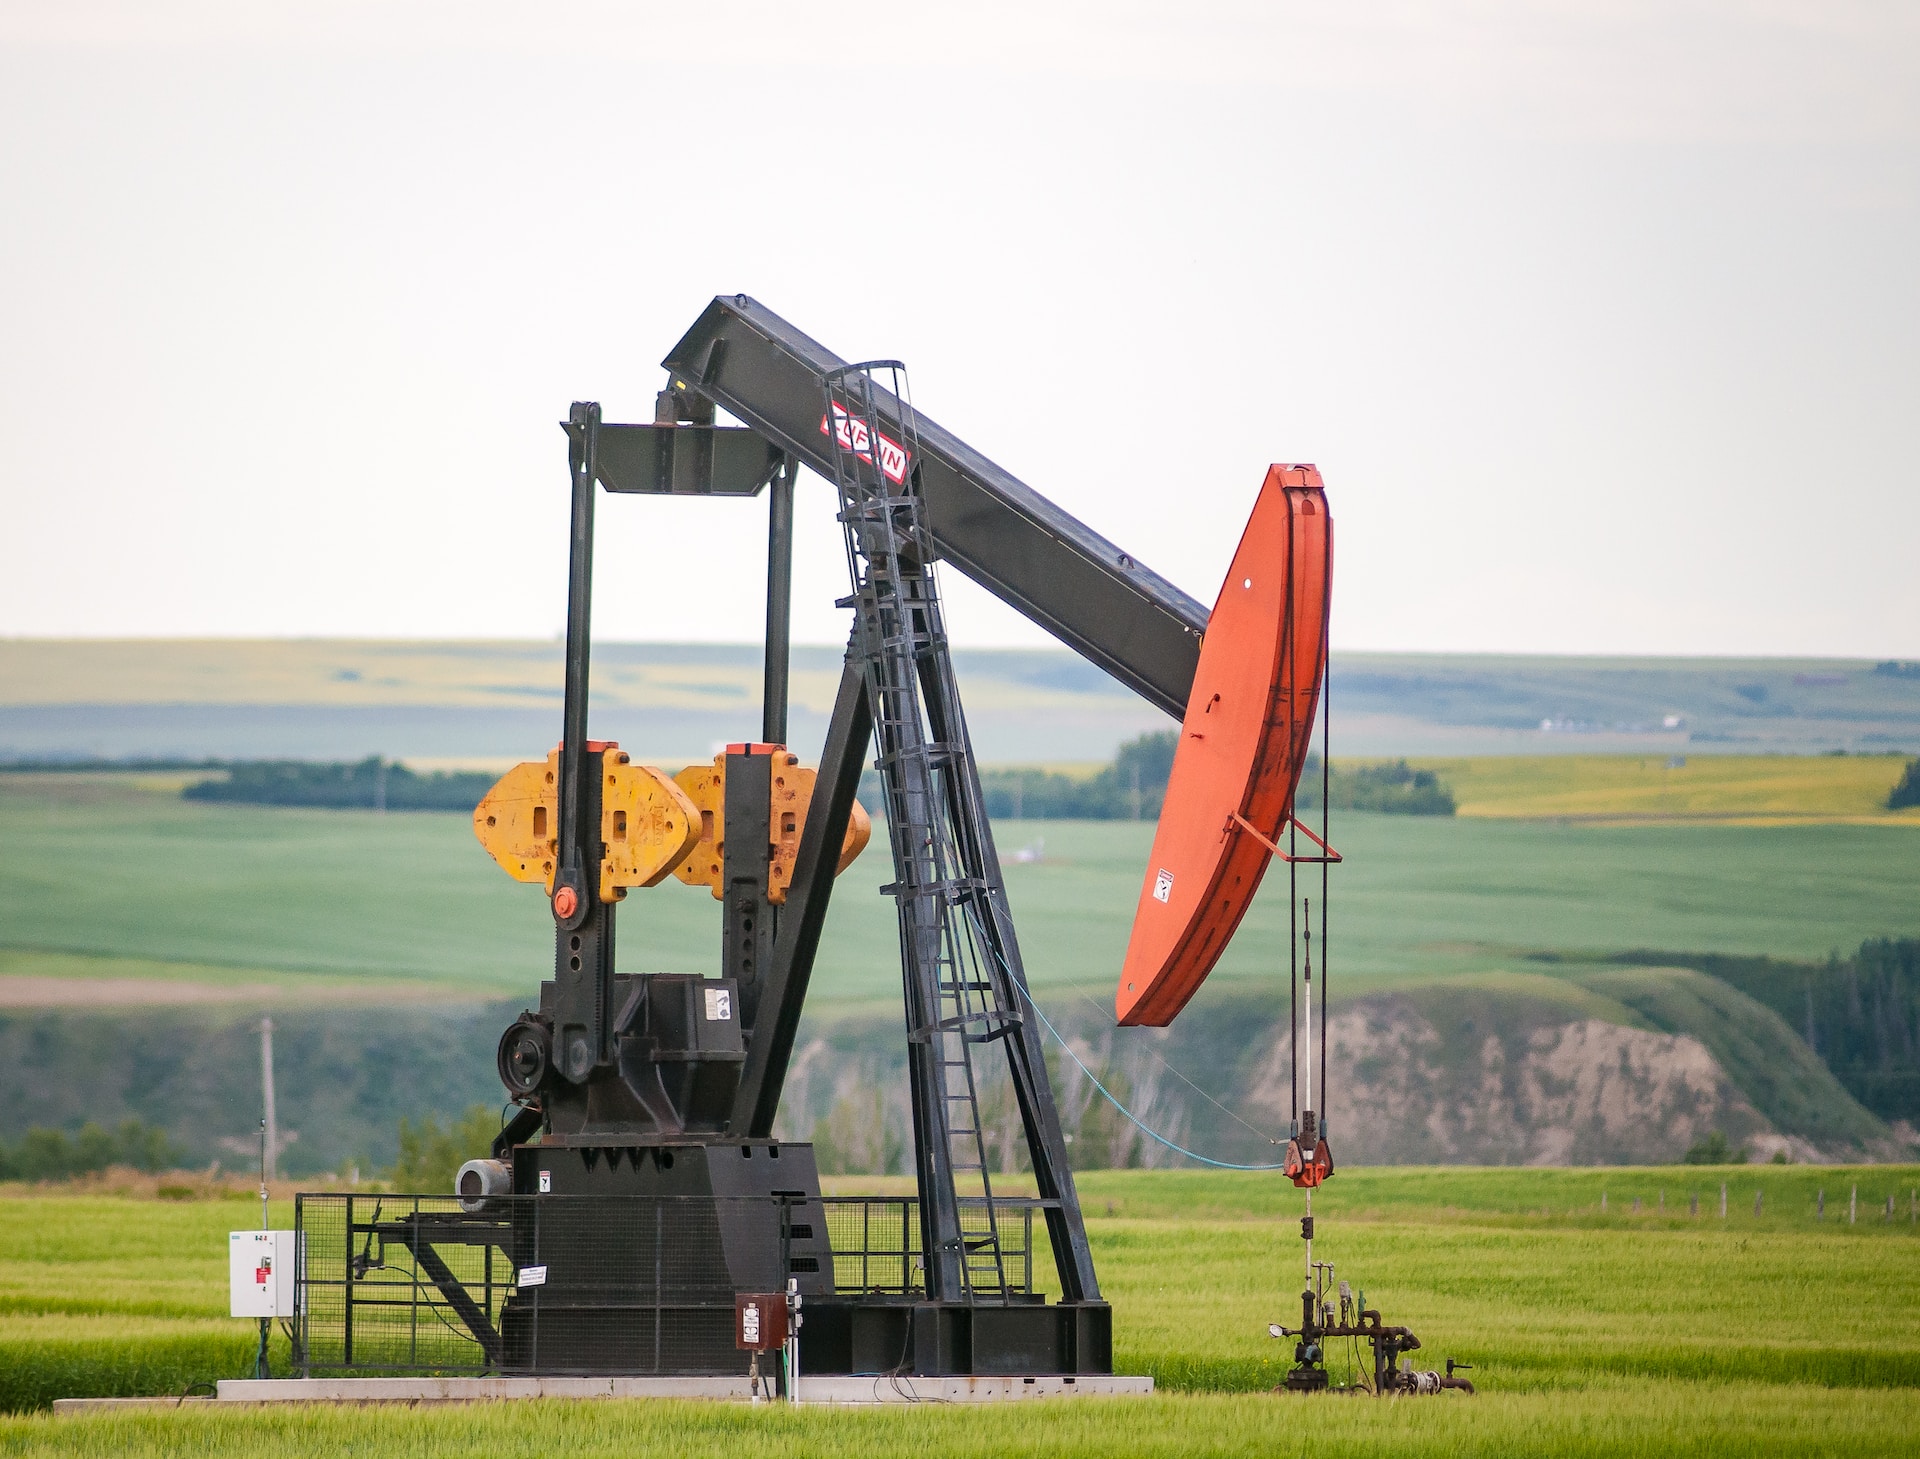 Alberta’s Energy Exports: A Global Perspective on Trade and Markets